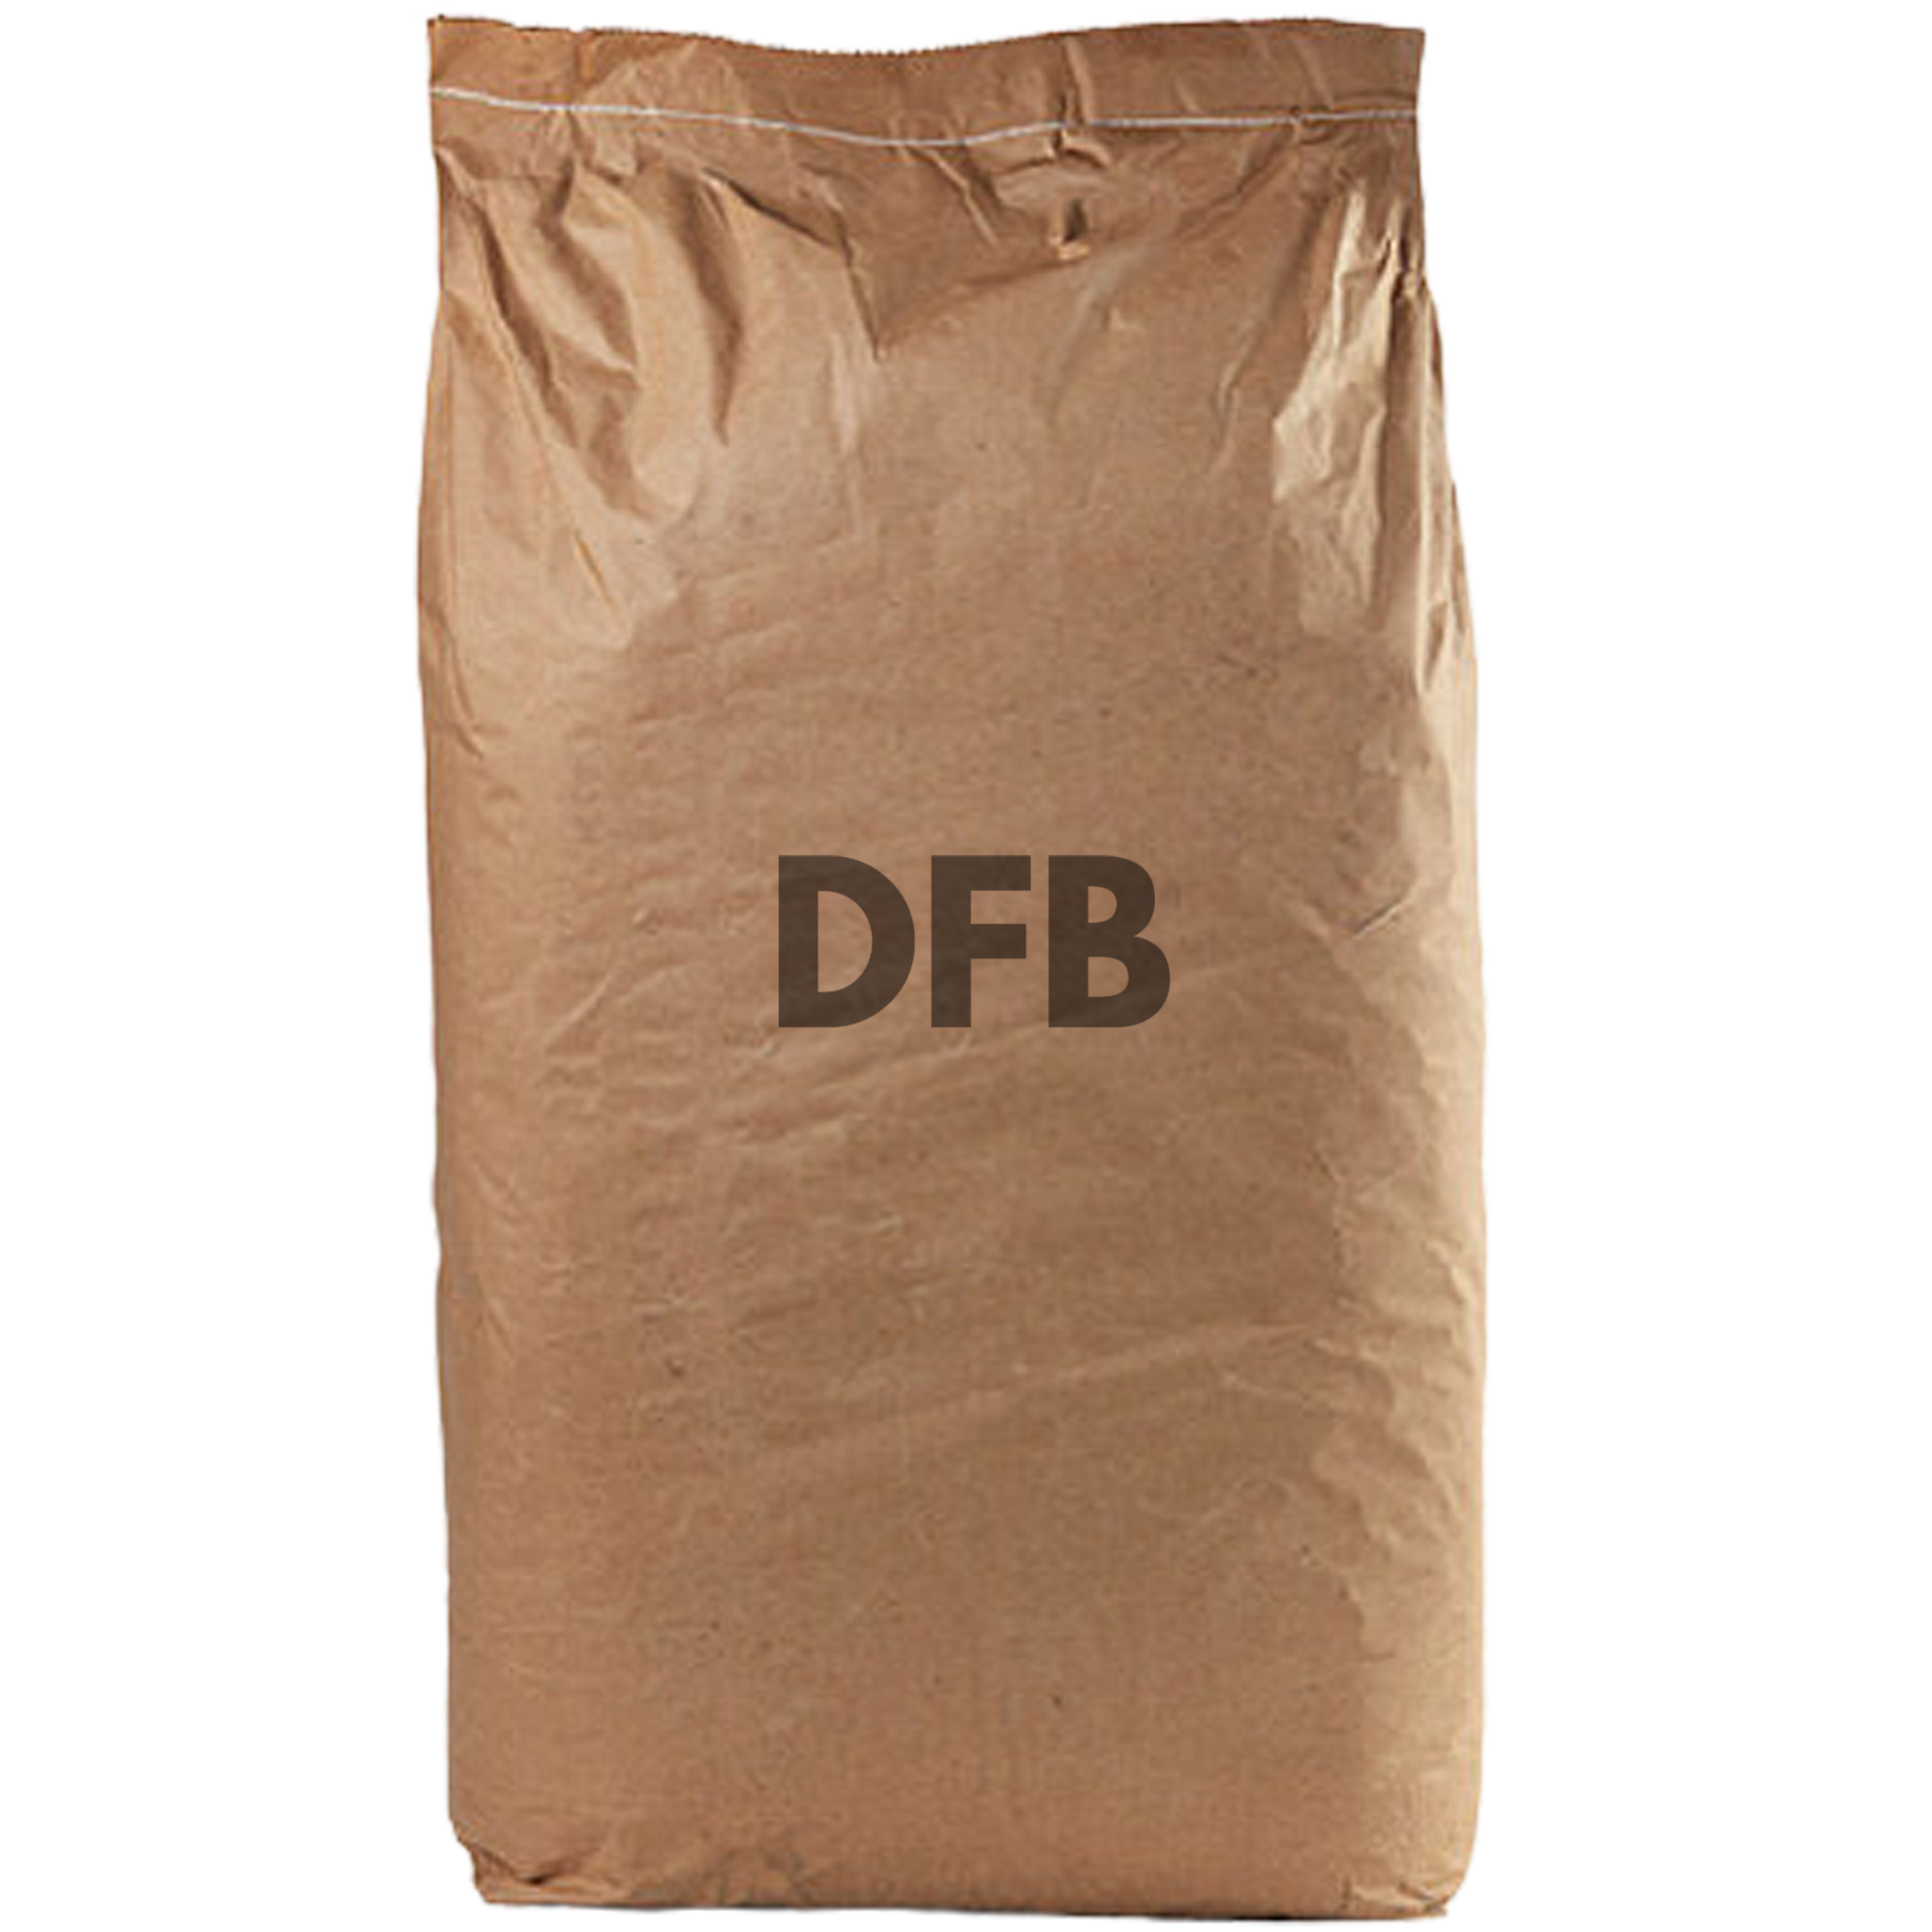 GNK - Mockup Packaging DFB - Paper Pouch